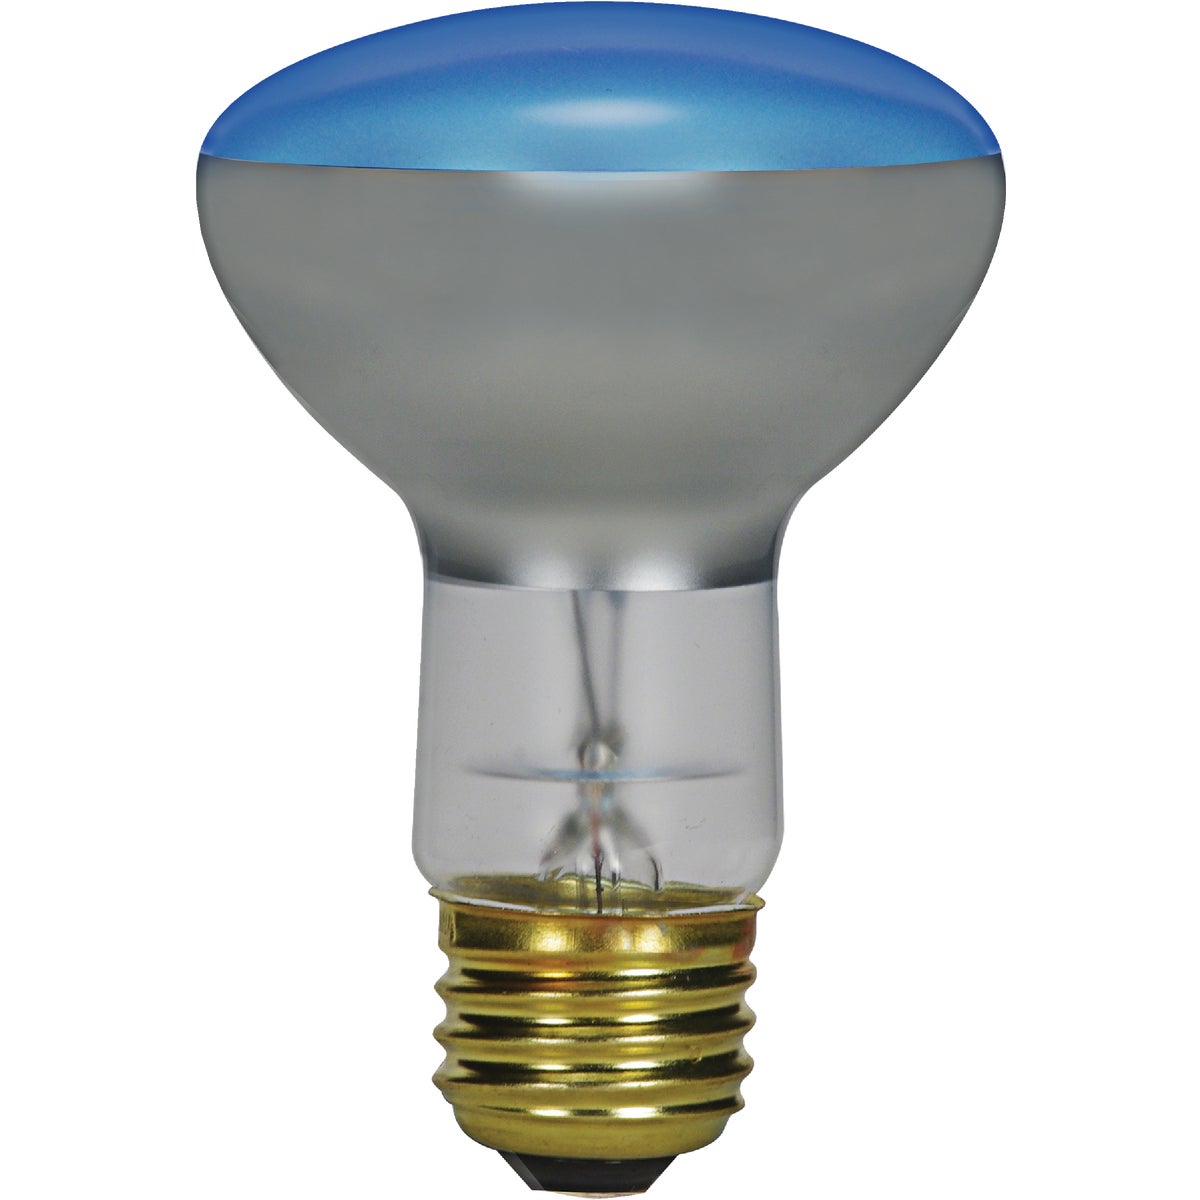 Satco 75W Frosted Medium Base R25 Incandescent Plant Light Bulb